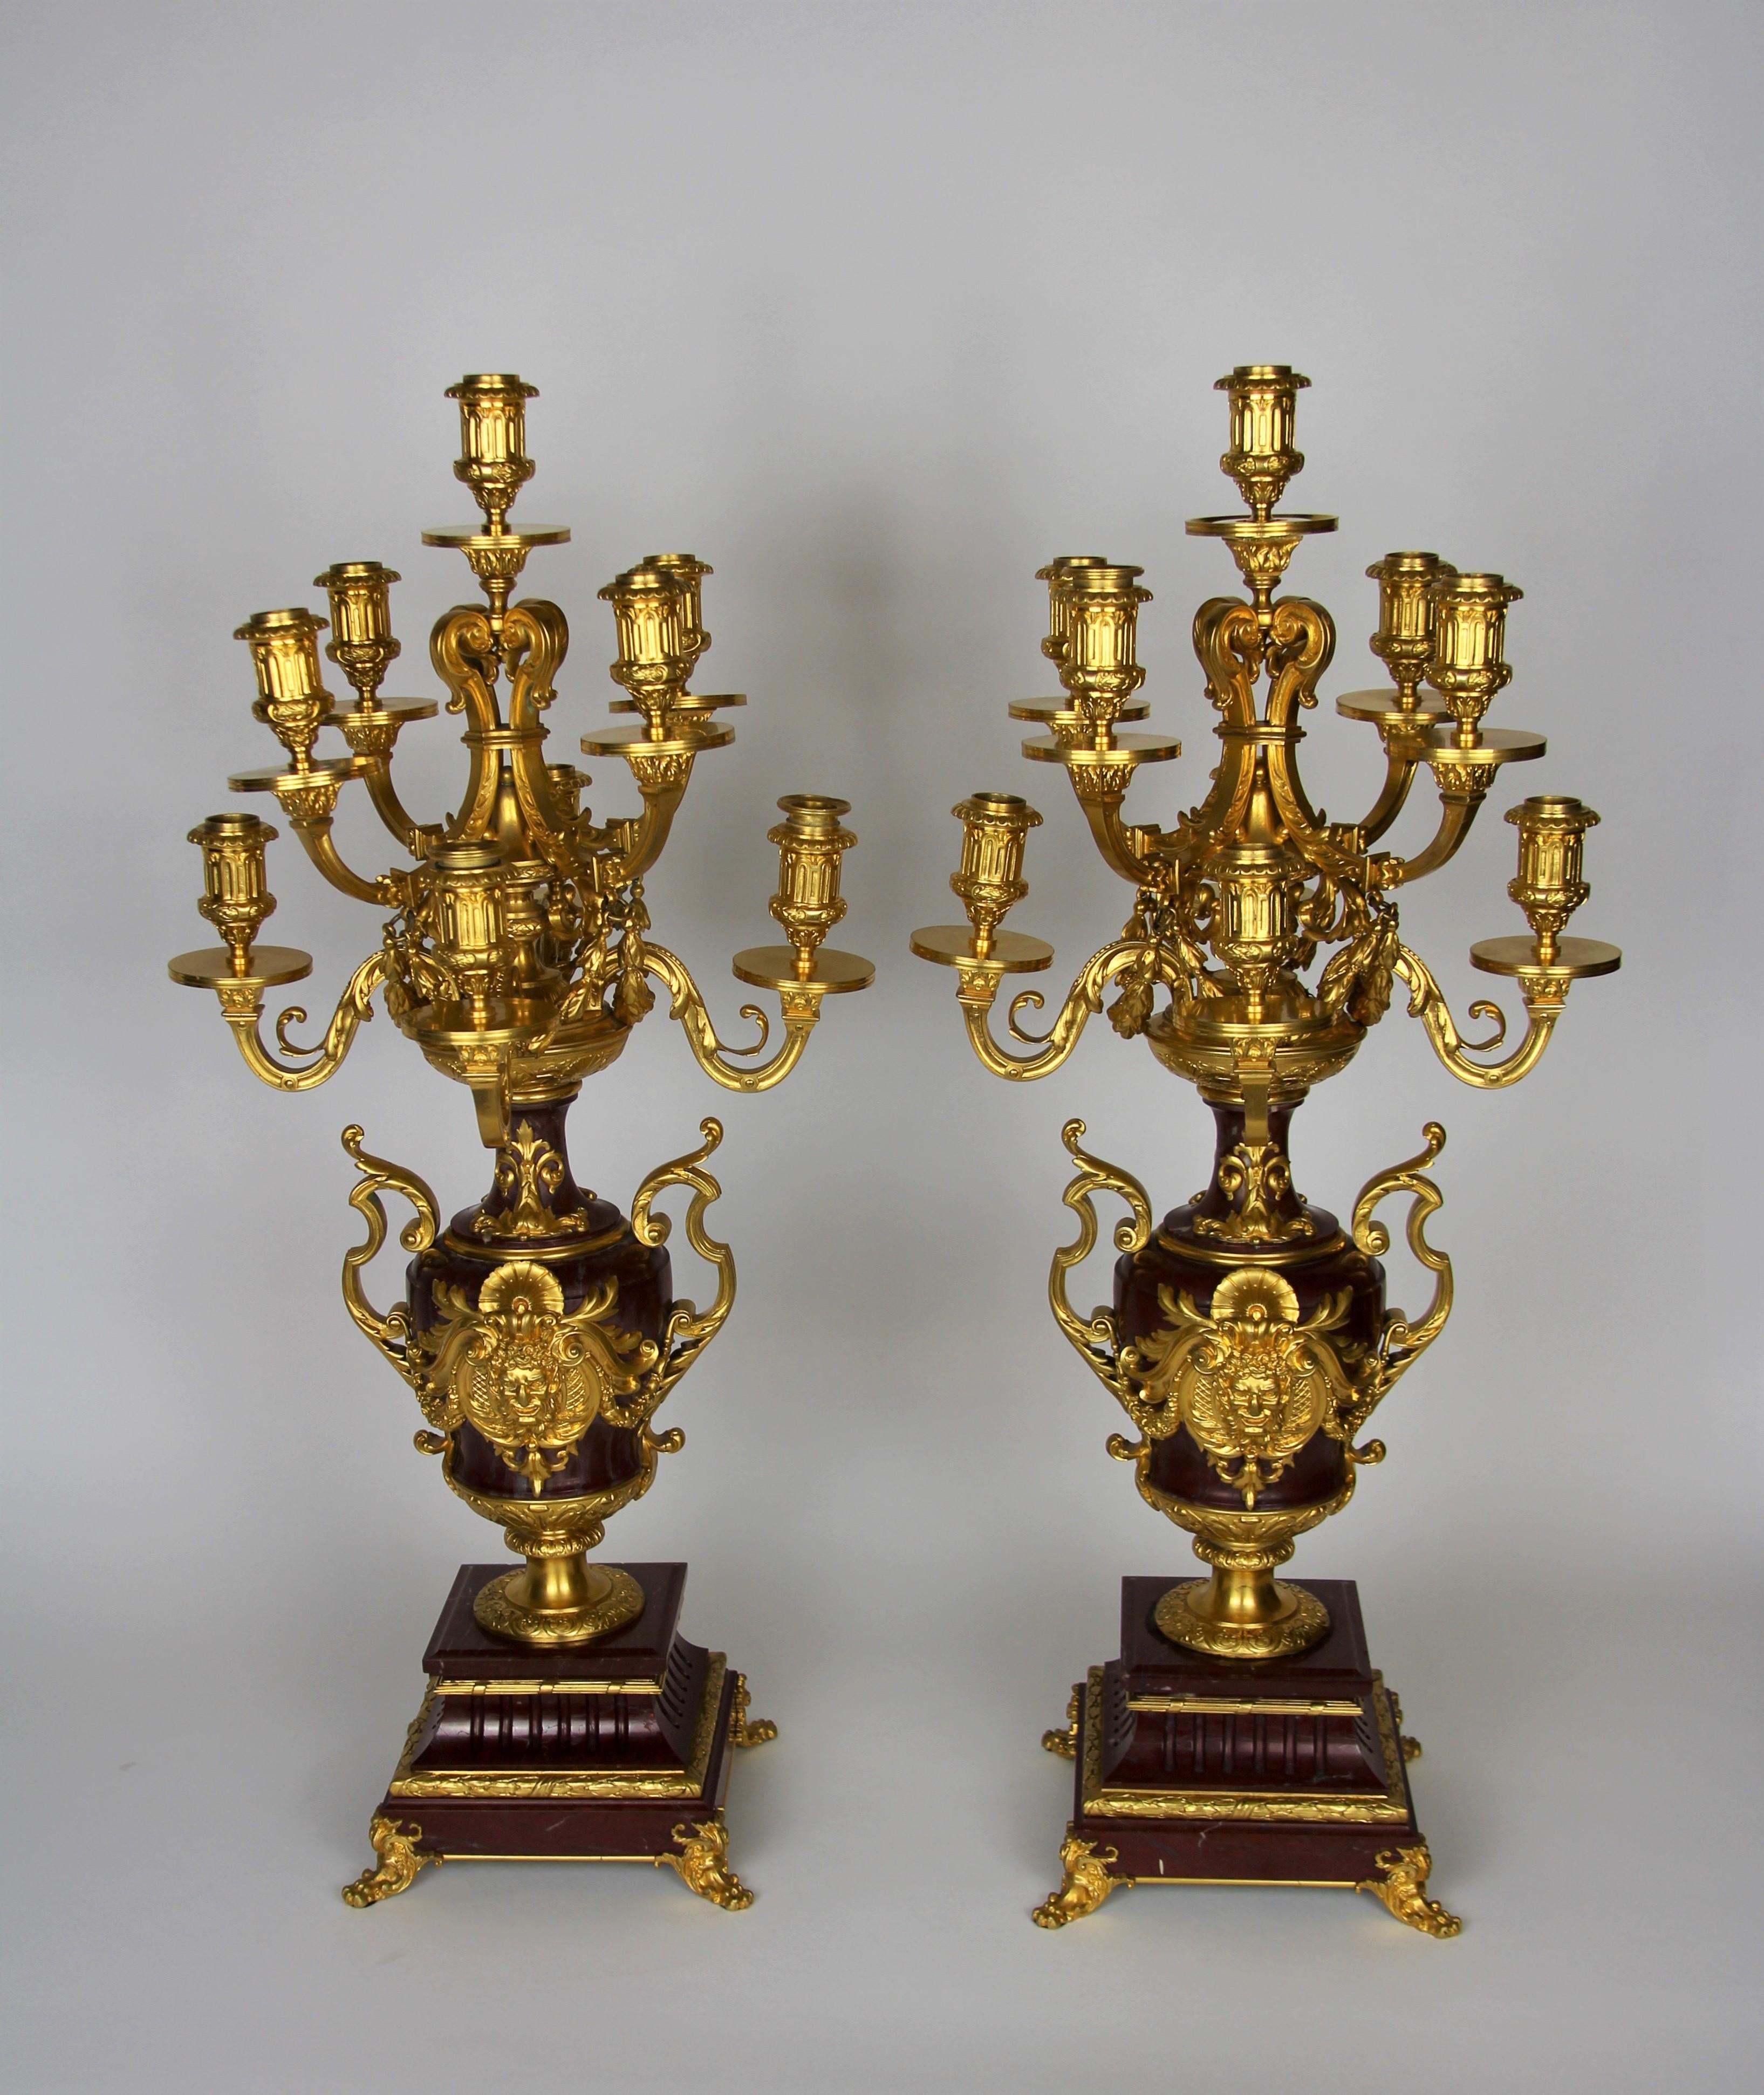 A fantastic pair of Louis XVI style doré bronze mounted rouge marble 9-arm candelabras with doré Bronze Hercules Masks and doré bronze swirling S-style handles, signed Barbedienne. This is truly a marvelous pair of candelabras made with the finest